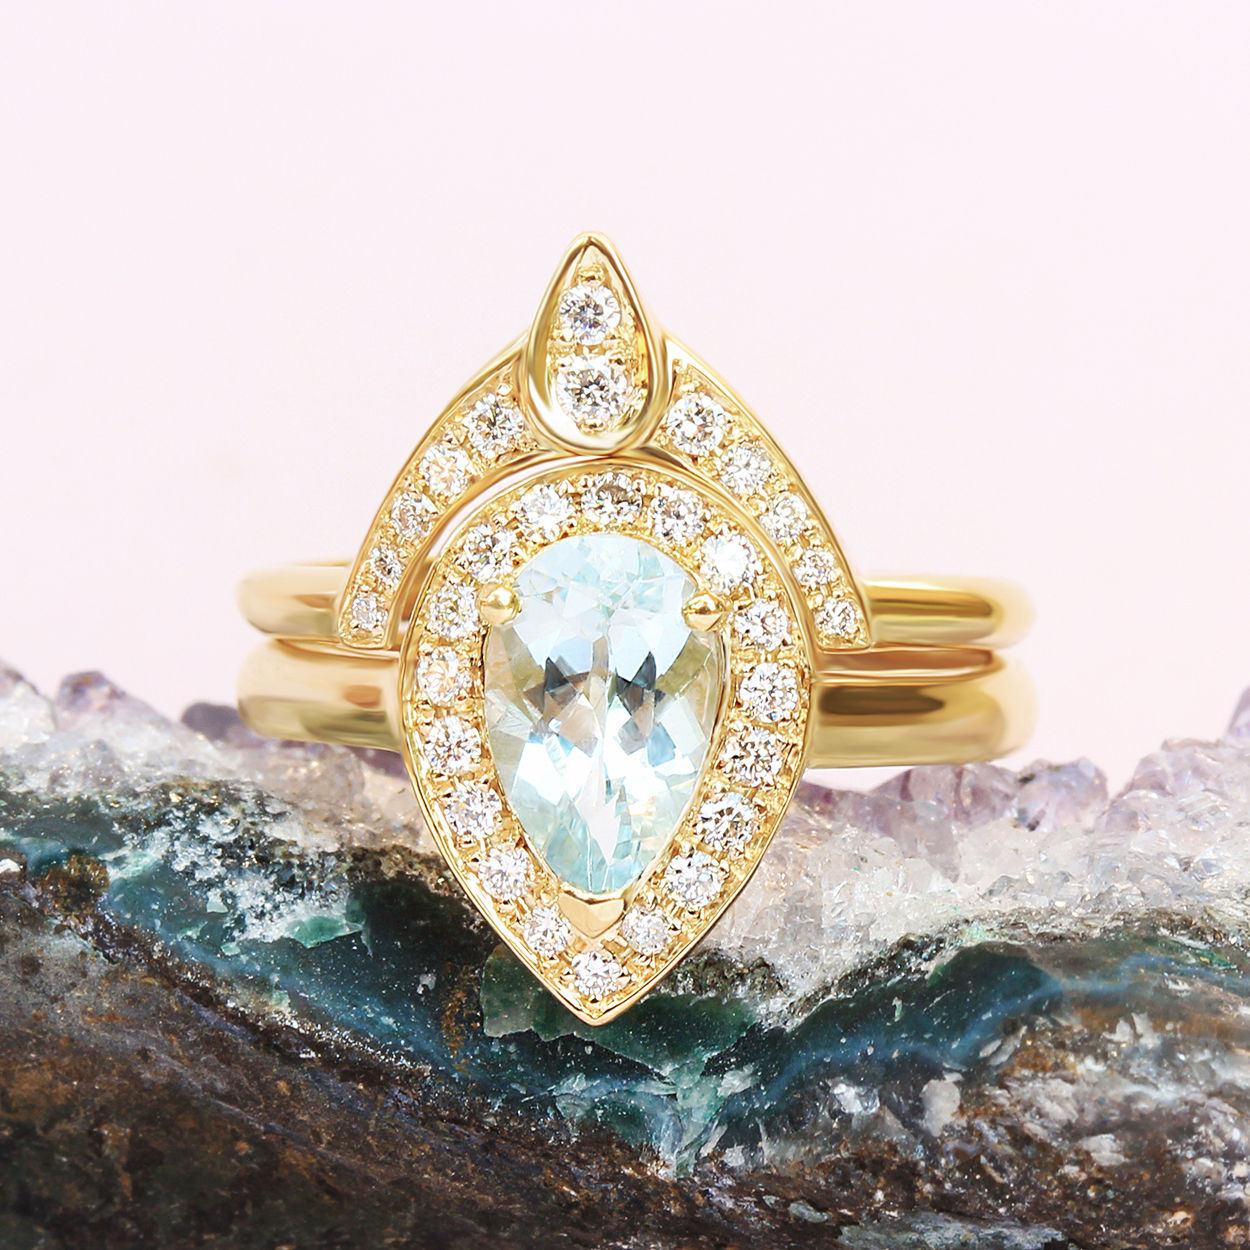 Pear Aquamarine Diamond Halo Ring Bridal Set.
* This list is for a two ring set.
Handmade with care. 
An original design by Silly Shiny Diamonds. 

Details: 
* Center Stone Shape: Pear shape. 
* Center Stone Type: light blue Aquamarine 0.70 carat.